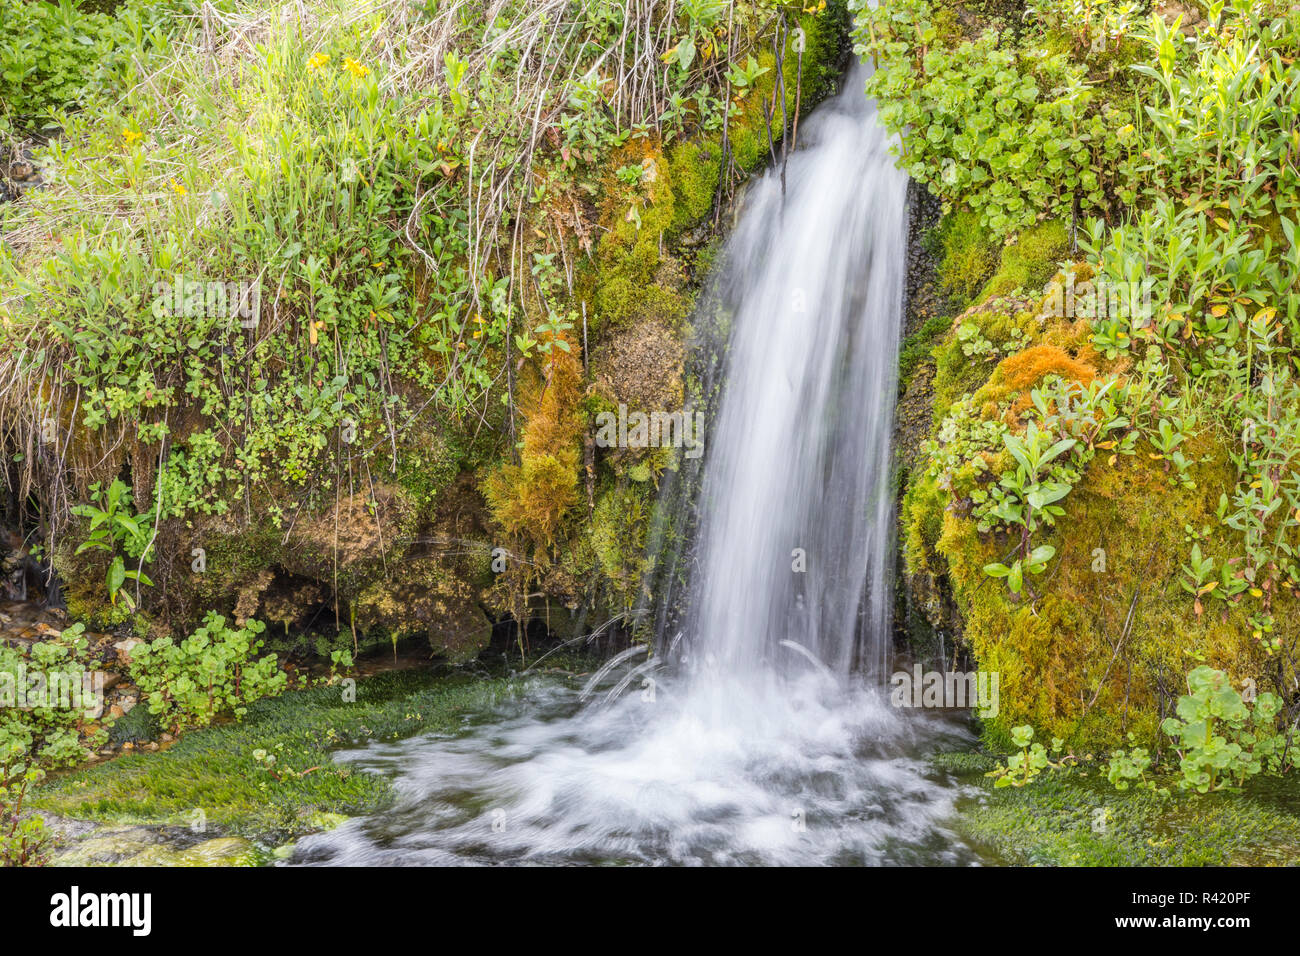 USA, Wyoming, Sublette County. Kendall Warm Springs, a small waterfall flowing over a mossy ledge. Stock Photo